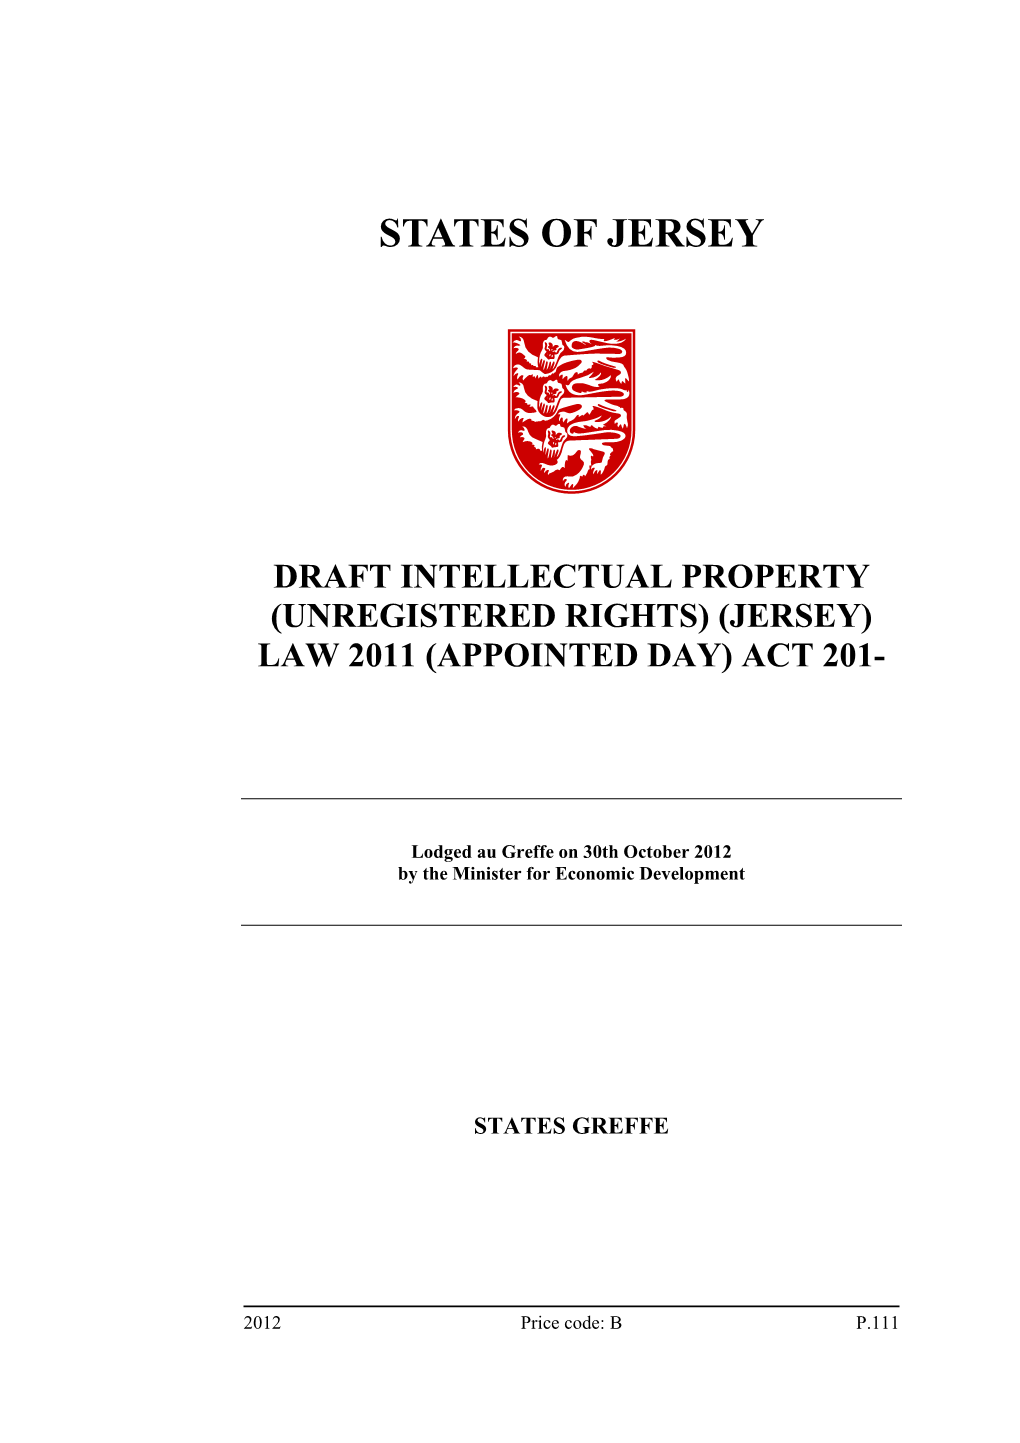 (Jersey) Law 2011 (Appointed Day) Act 201